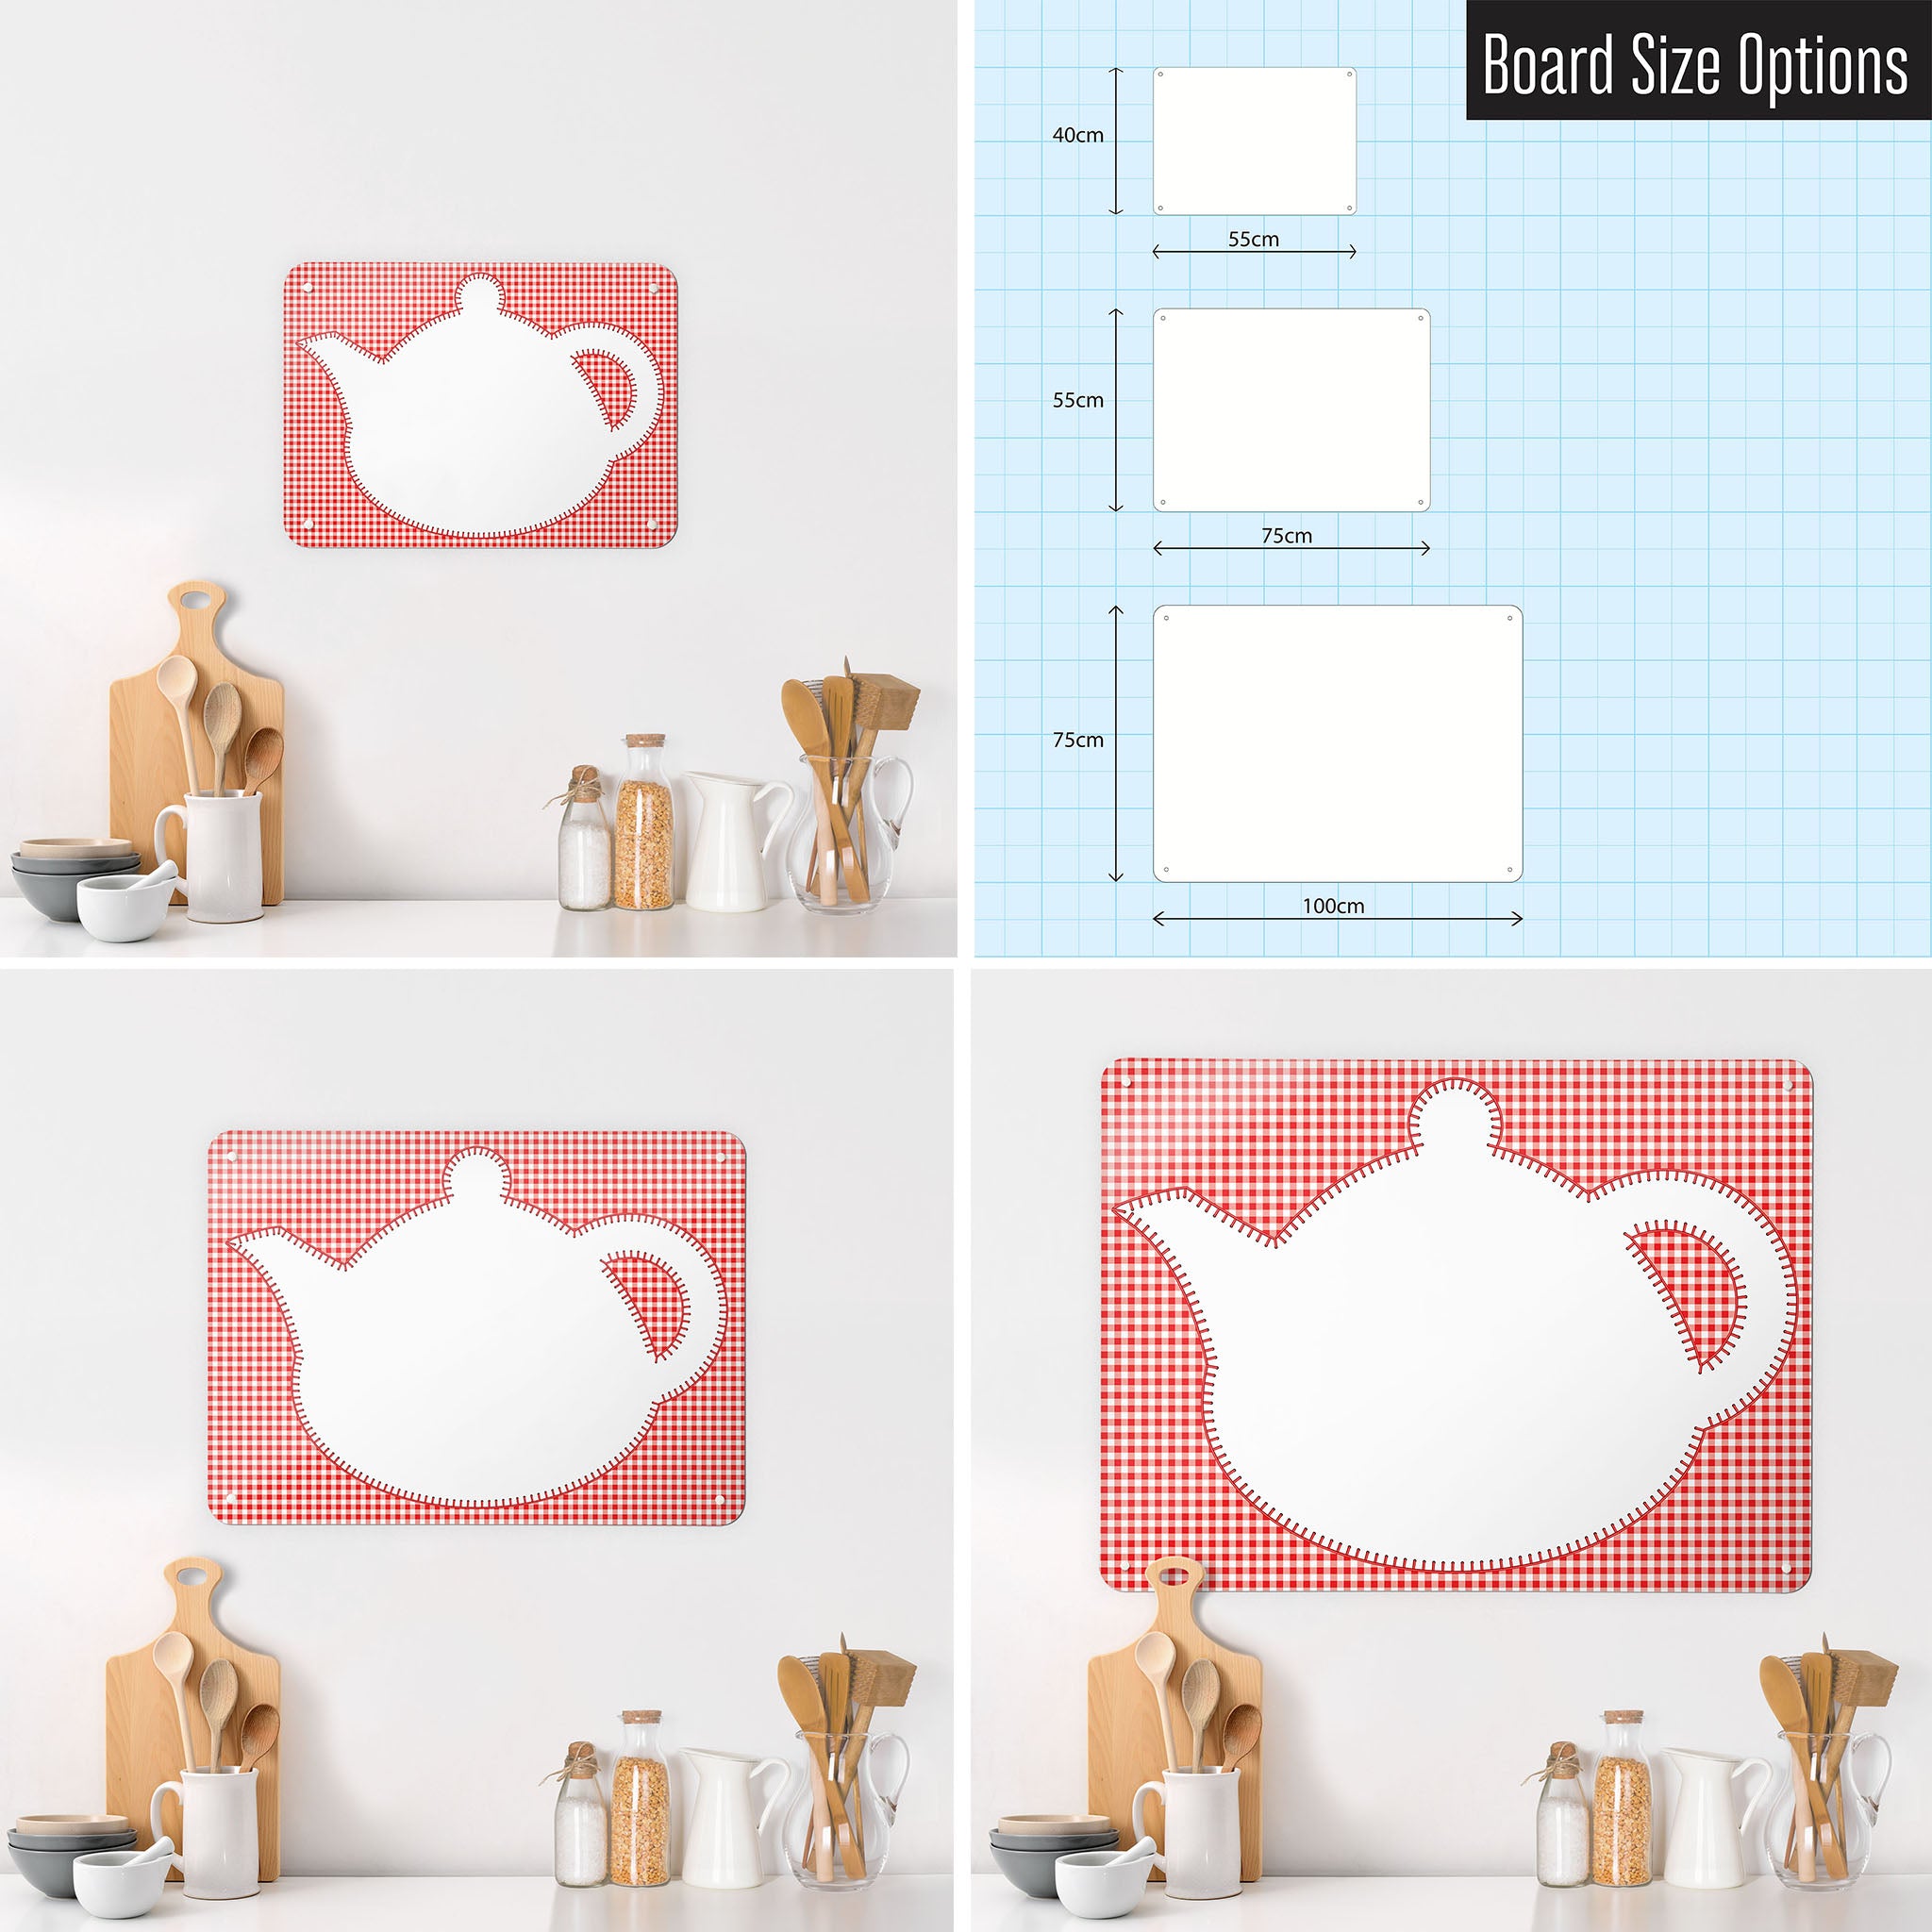 Three photographs of a workspace interior and a diagram to show size comparisons of an appliqué teapot design dry wipe magnetic notice board